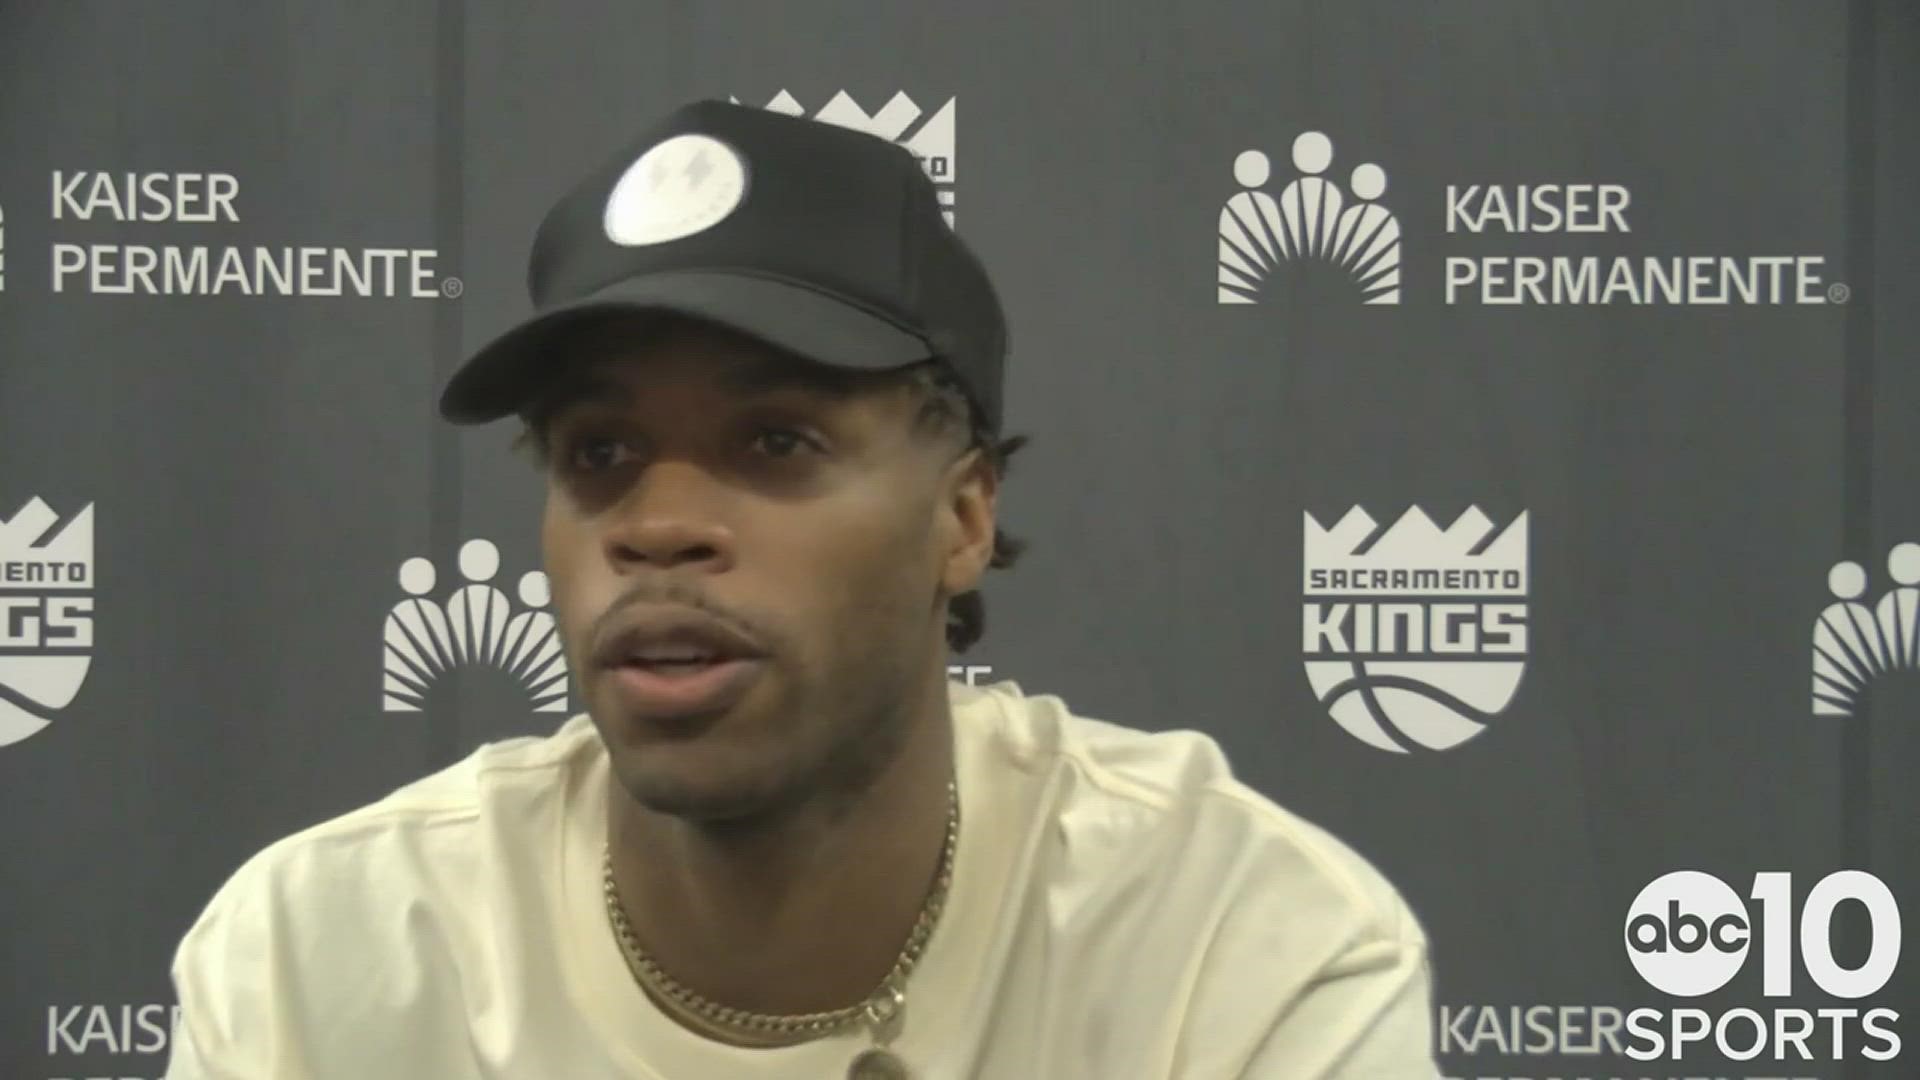 Buddy Hield talks about Wednesday night's season opening 124-121 win in Portland over the Trail Blazers and tying Peja Stojakovic 3-point mark in Sacramento history.